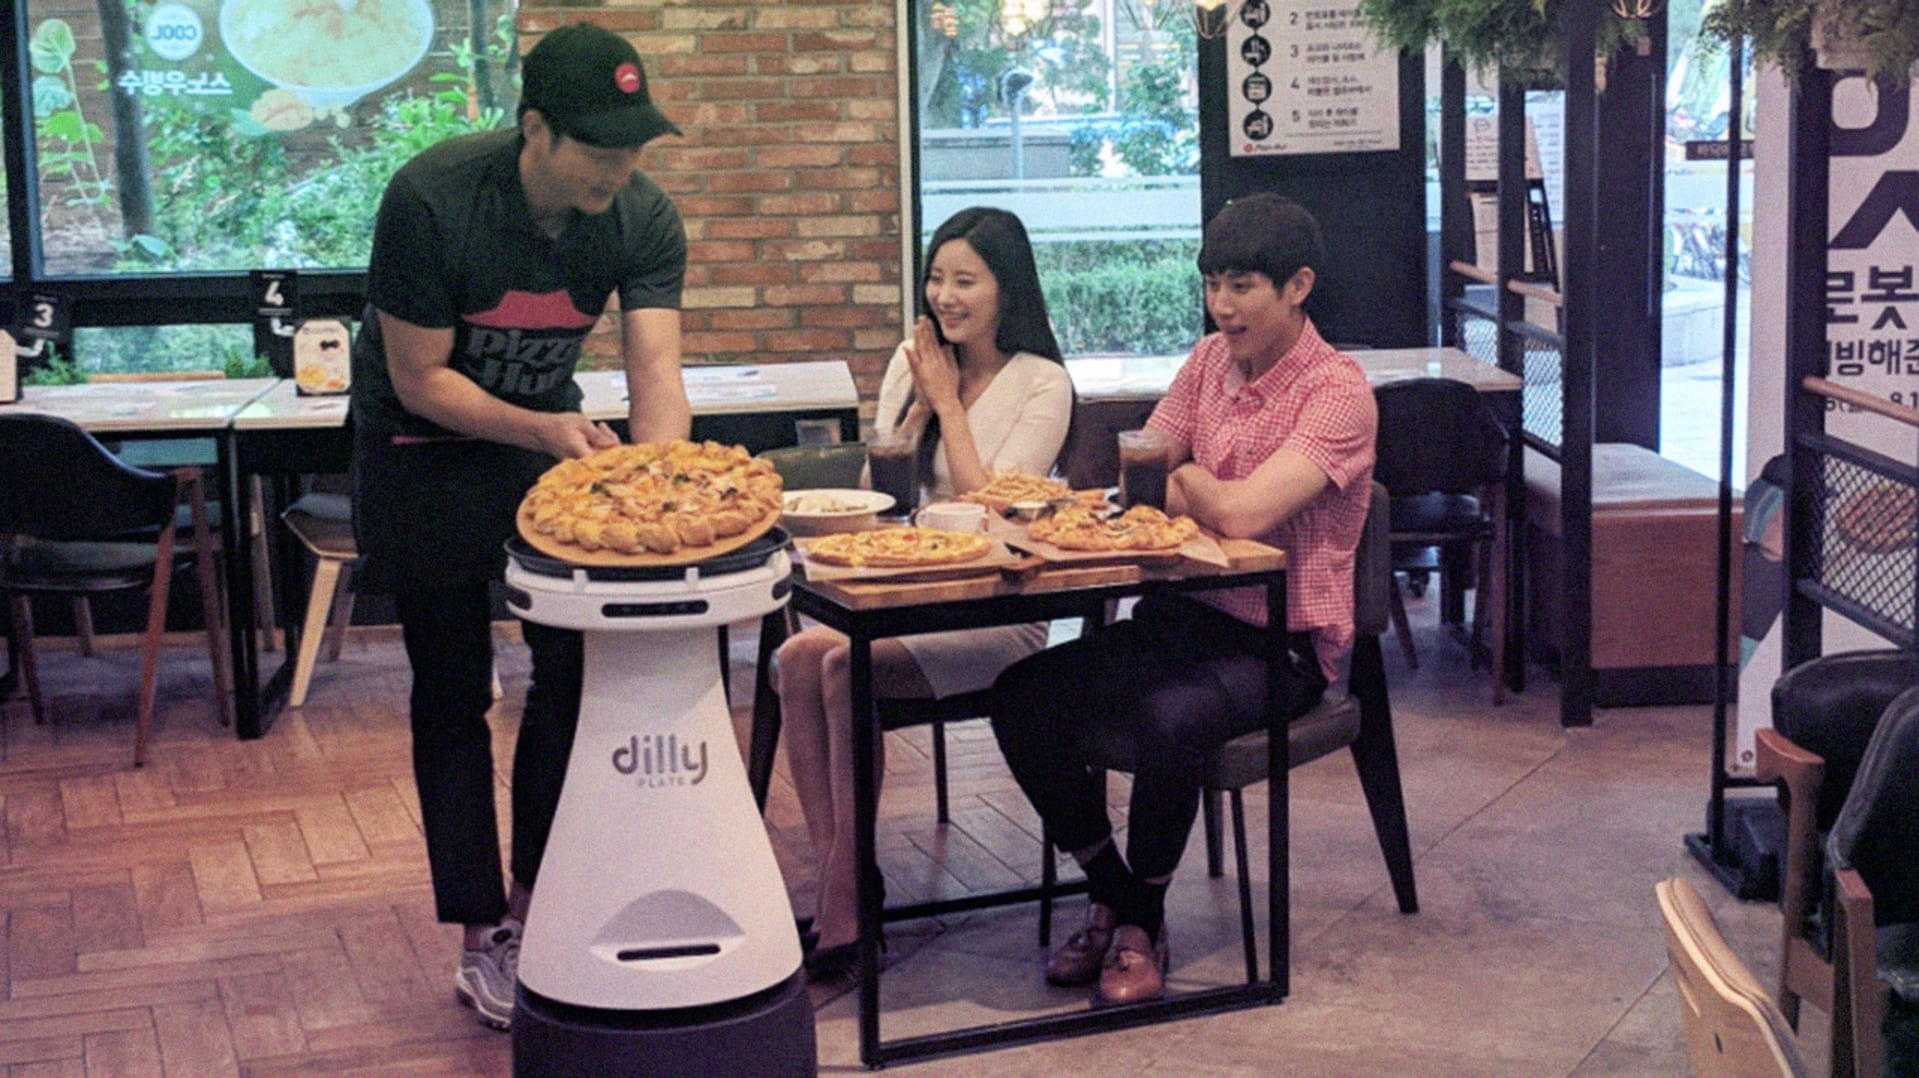 Pizza Hut has a new robot waiter in Korea, and we’re booking a ticket to Seoul